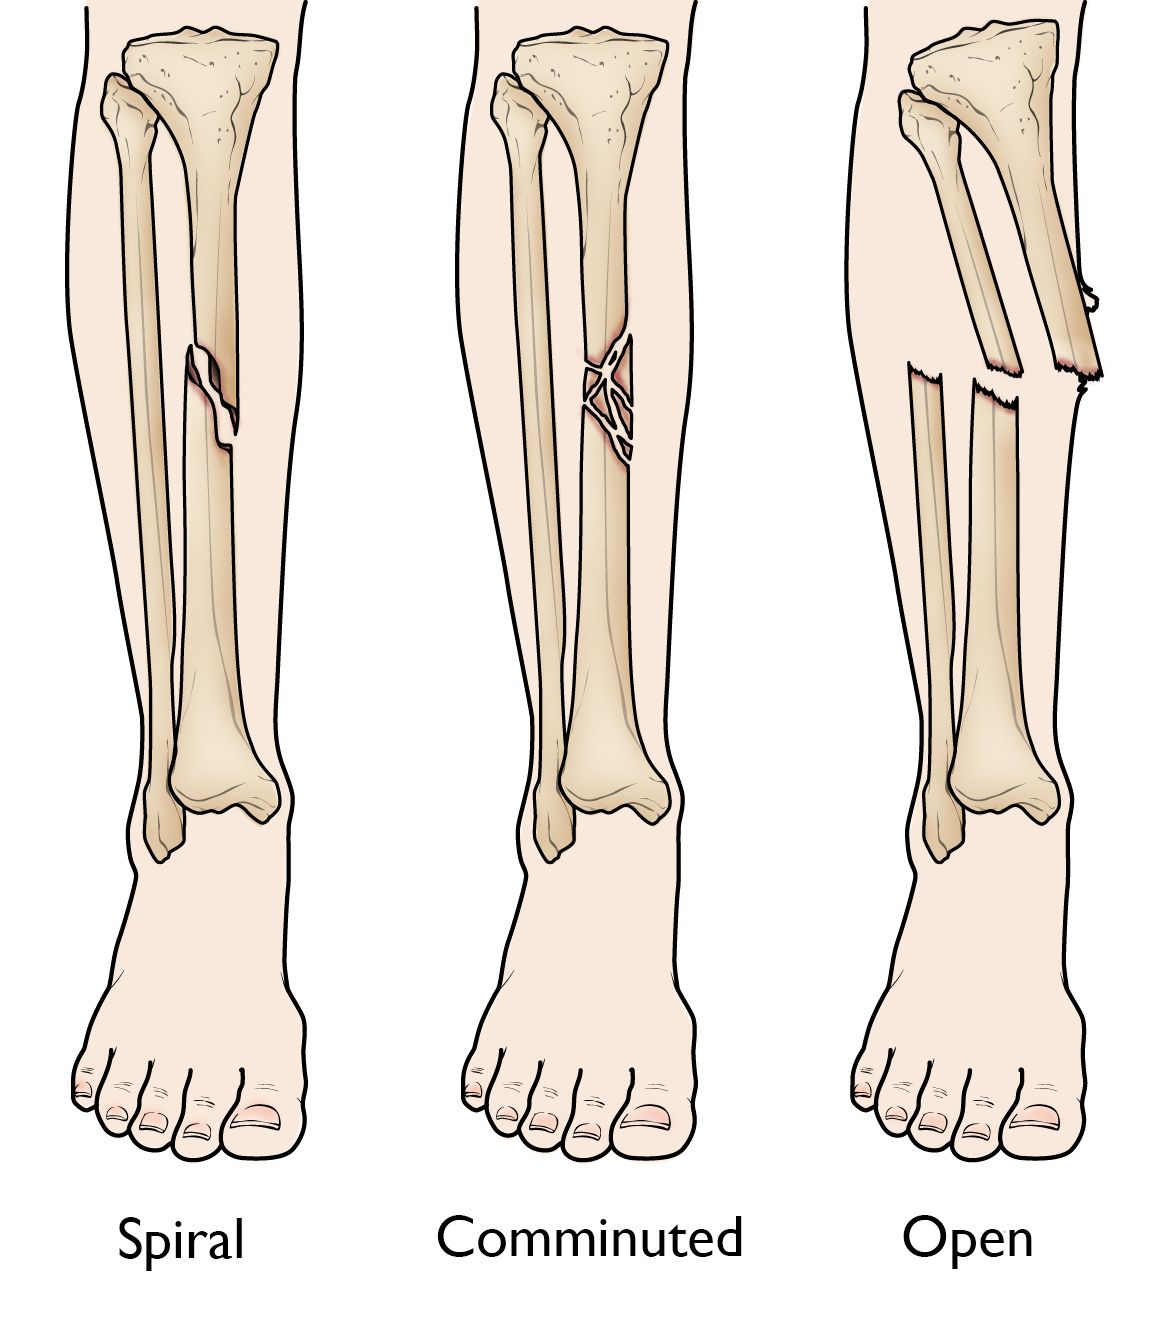 Spiral, comminuted, and open tibial shaft fractures